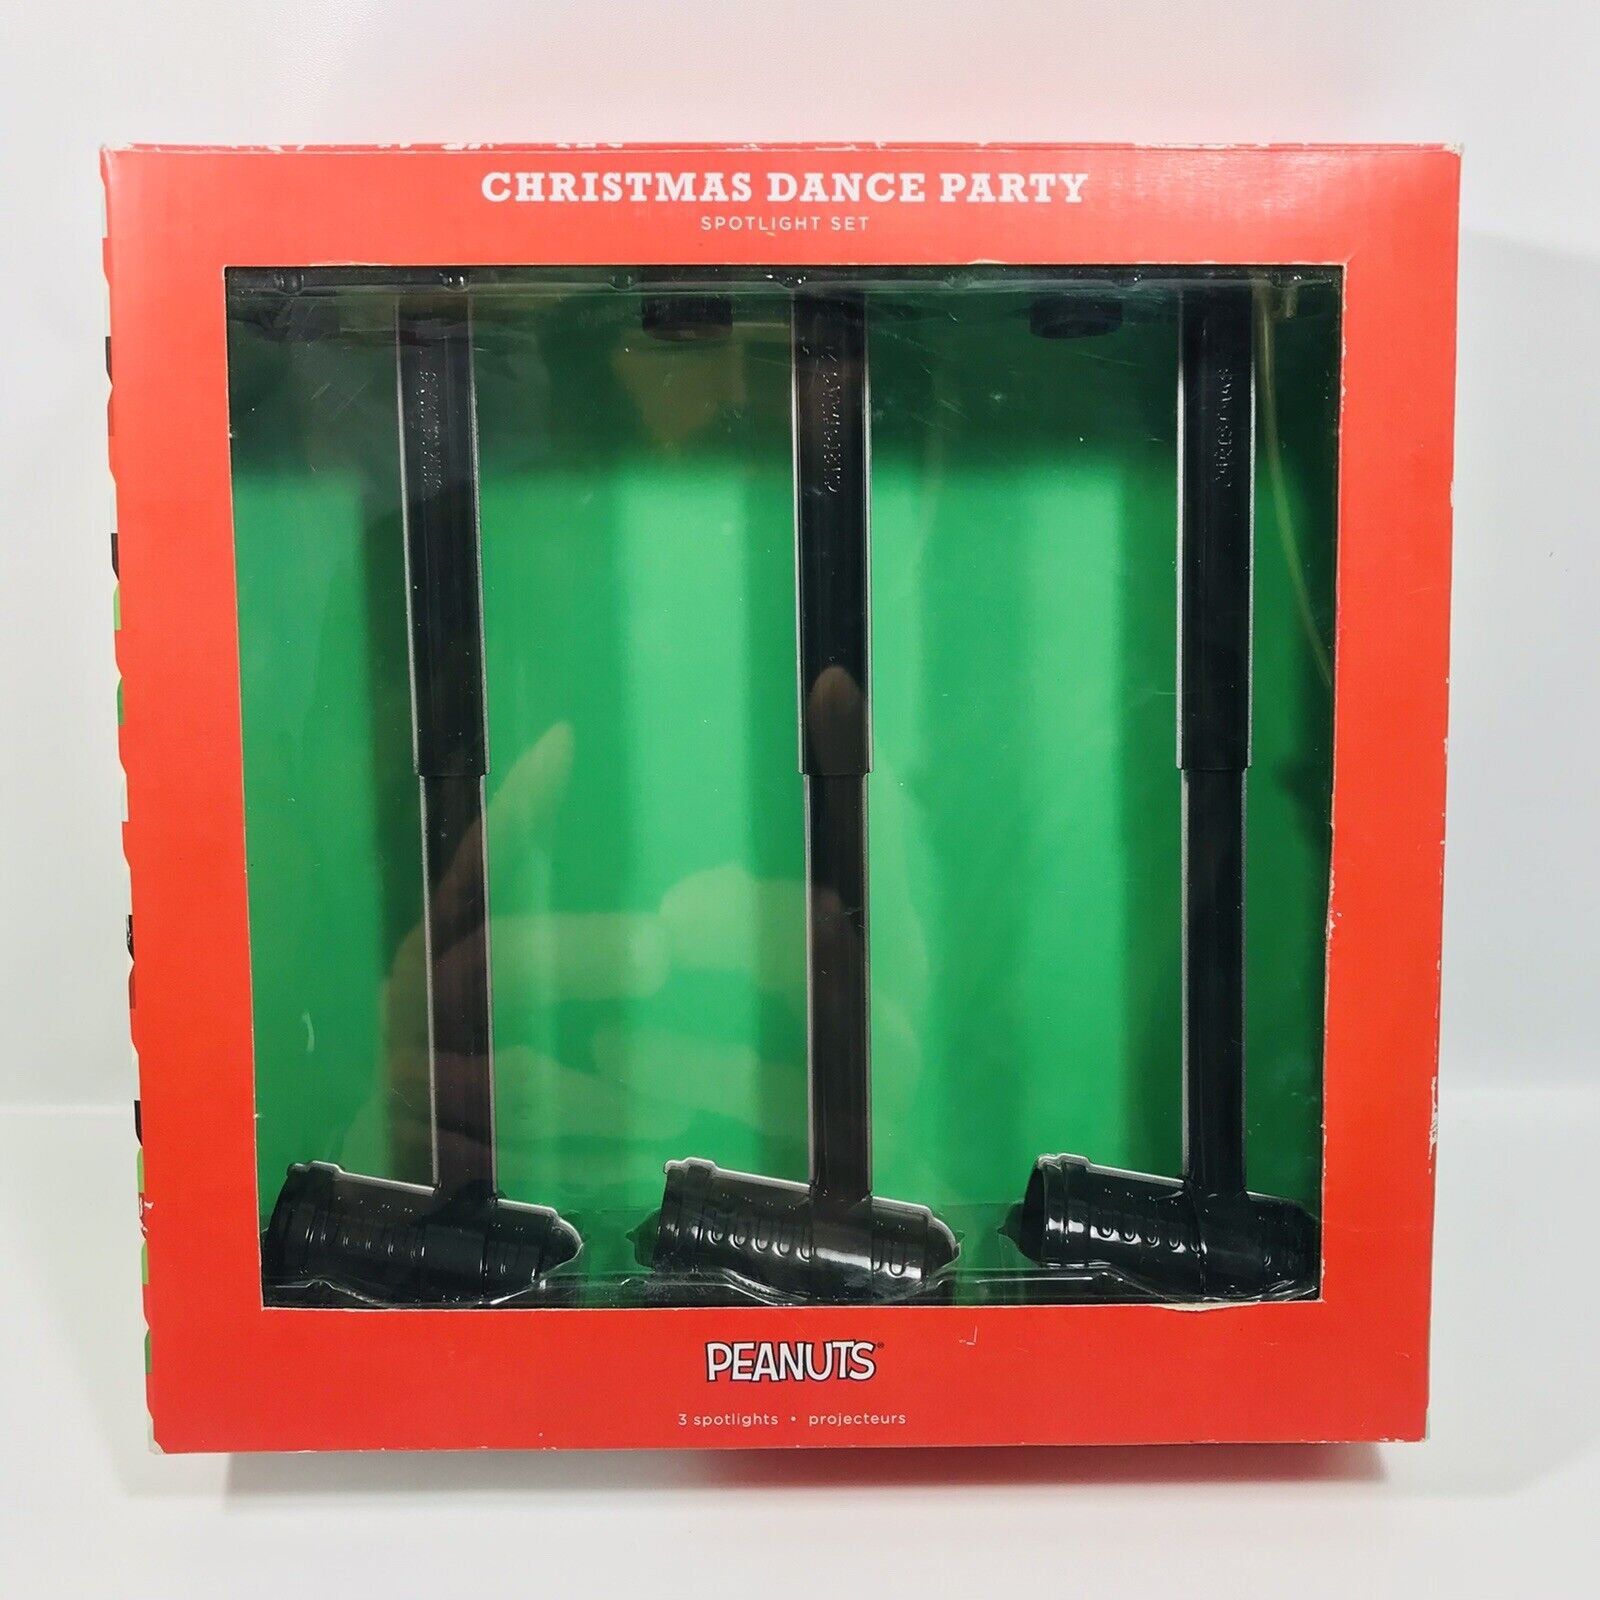 Hallmark Peanuts Christmas Dance Party Spotlight Set Color Changing LED Holiday